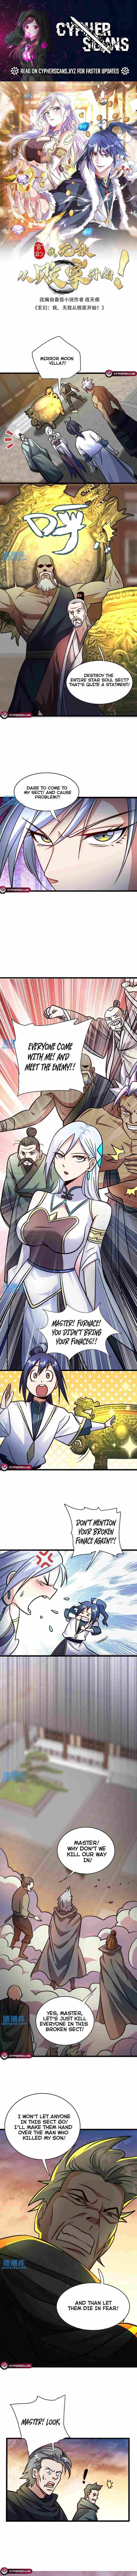 Fusion Fantasy: Nine Celestial Maiden Masters From The Get-Go - Page 2